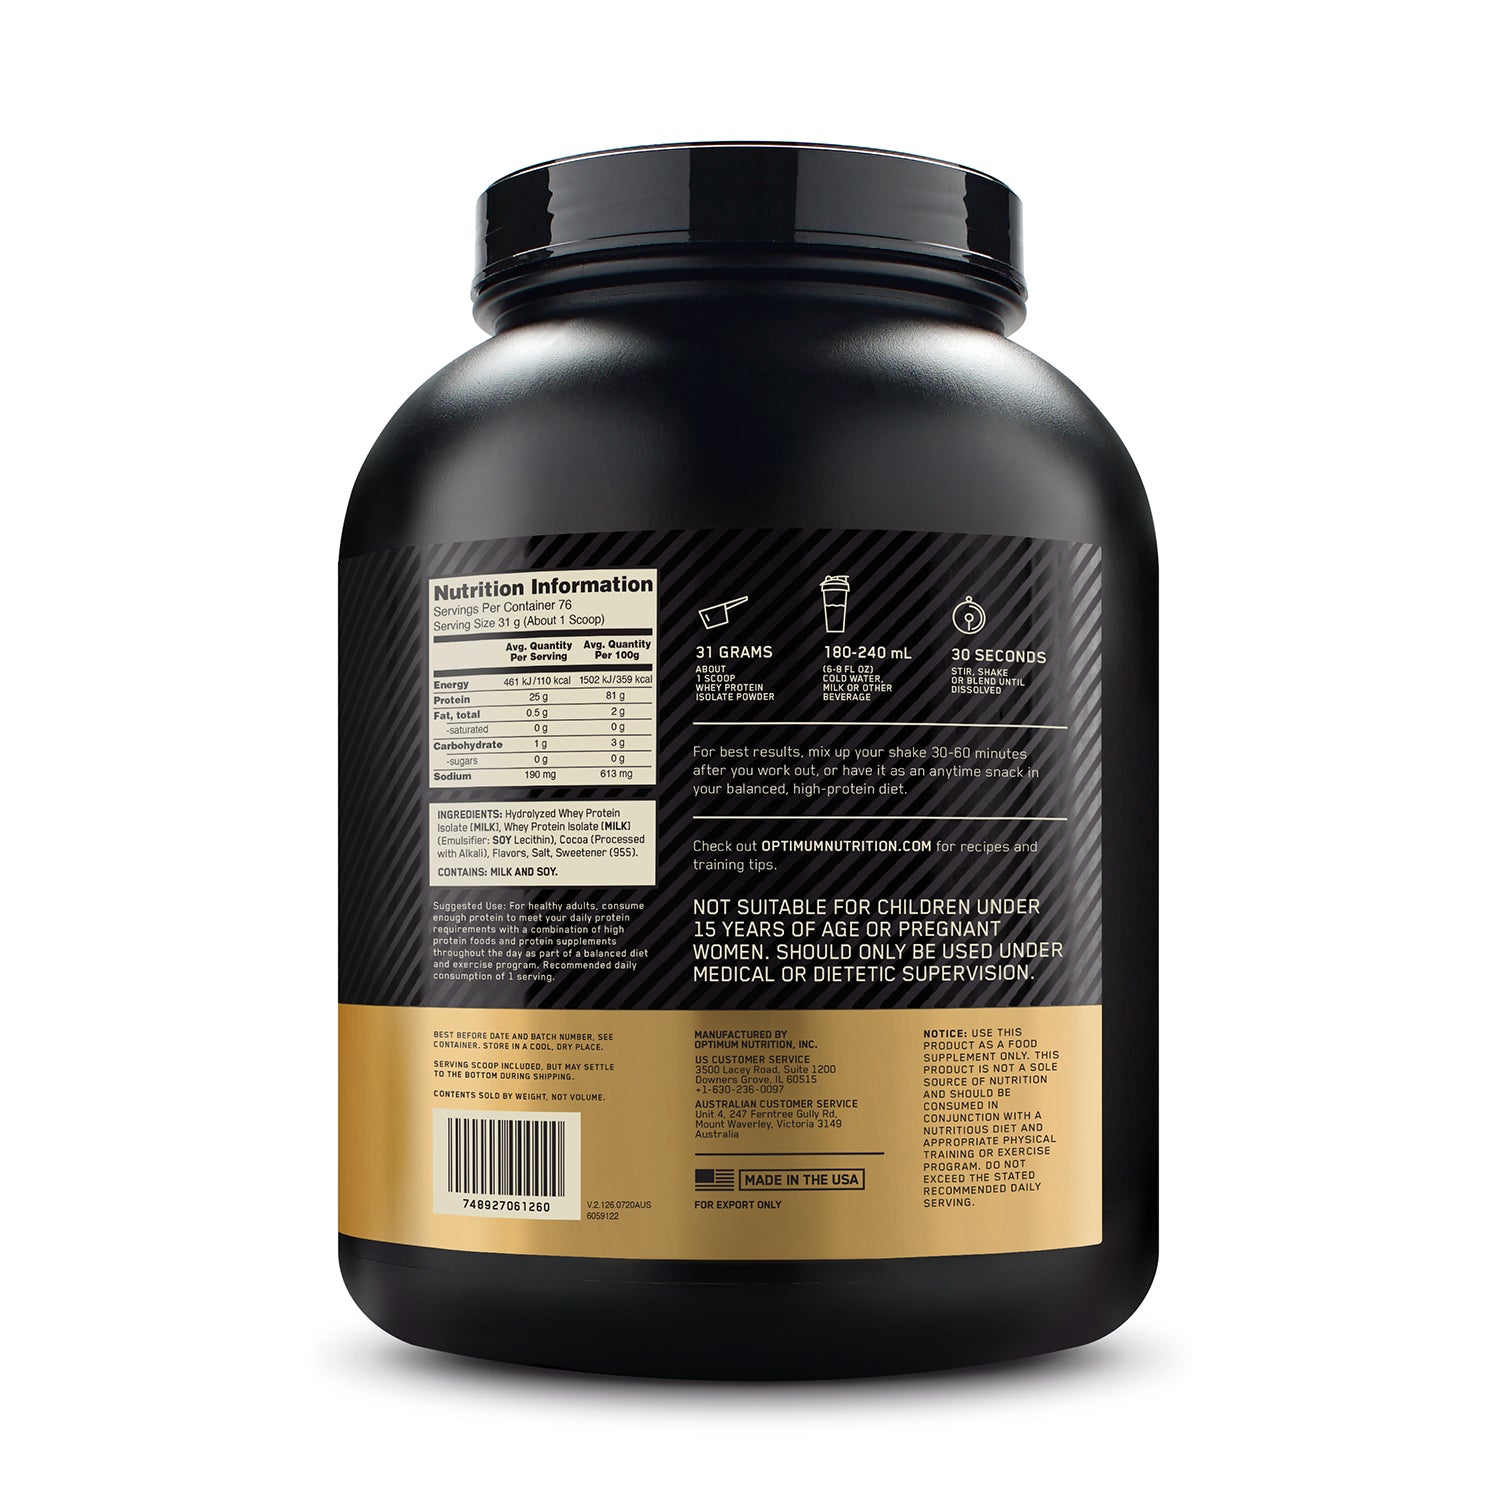 Gold Standard 100 Isolate Ultra Filtered Whey Protein - Chocolate Bliss 236 Kgs (52 lbs)